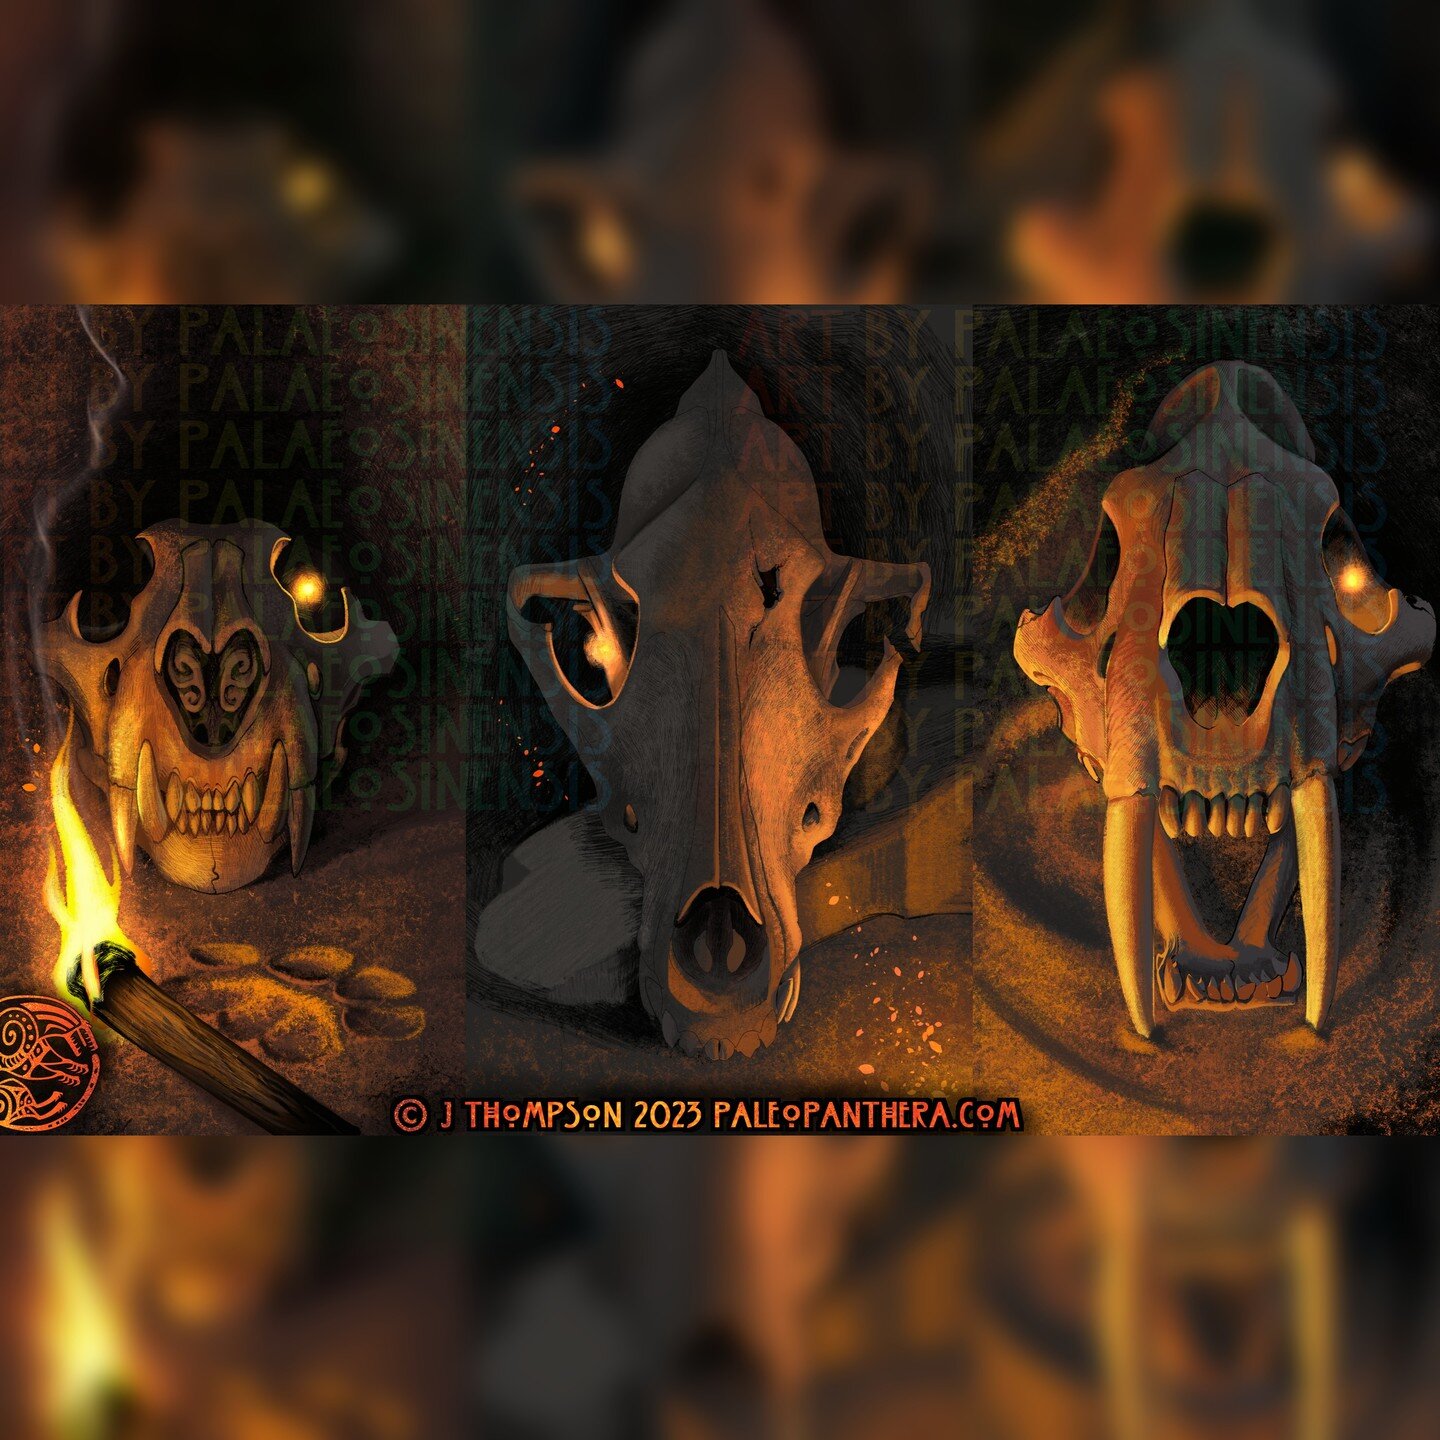 A small peek at what I've been working on the last couple of days. None are done. They're for a &quot;what if&quot; project that I'm curious to see where it's going.

#skull #skulls #cavelion #wolf #smilodon #bone #bones #fossil #fossils #art #digita